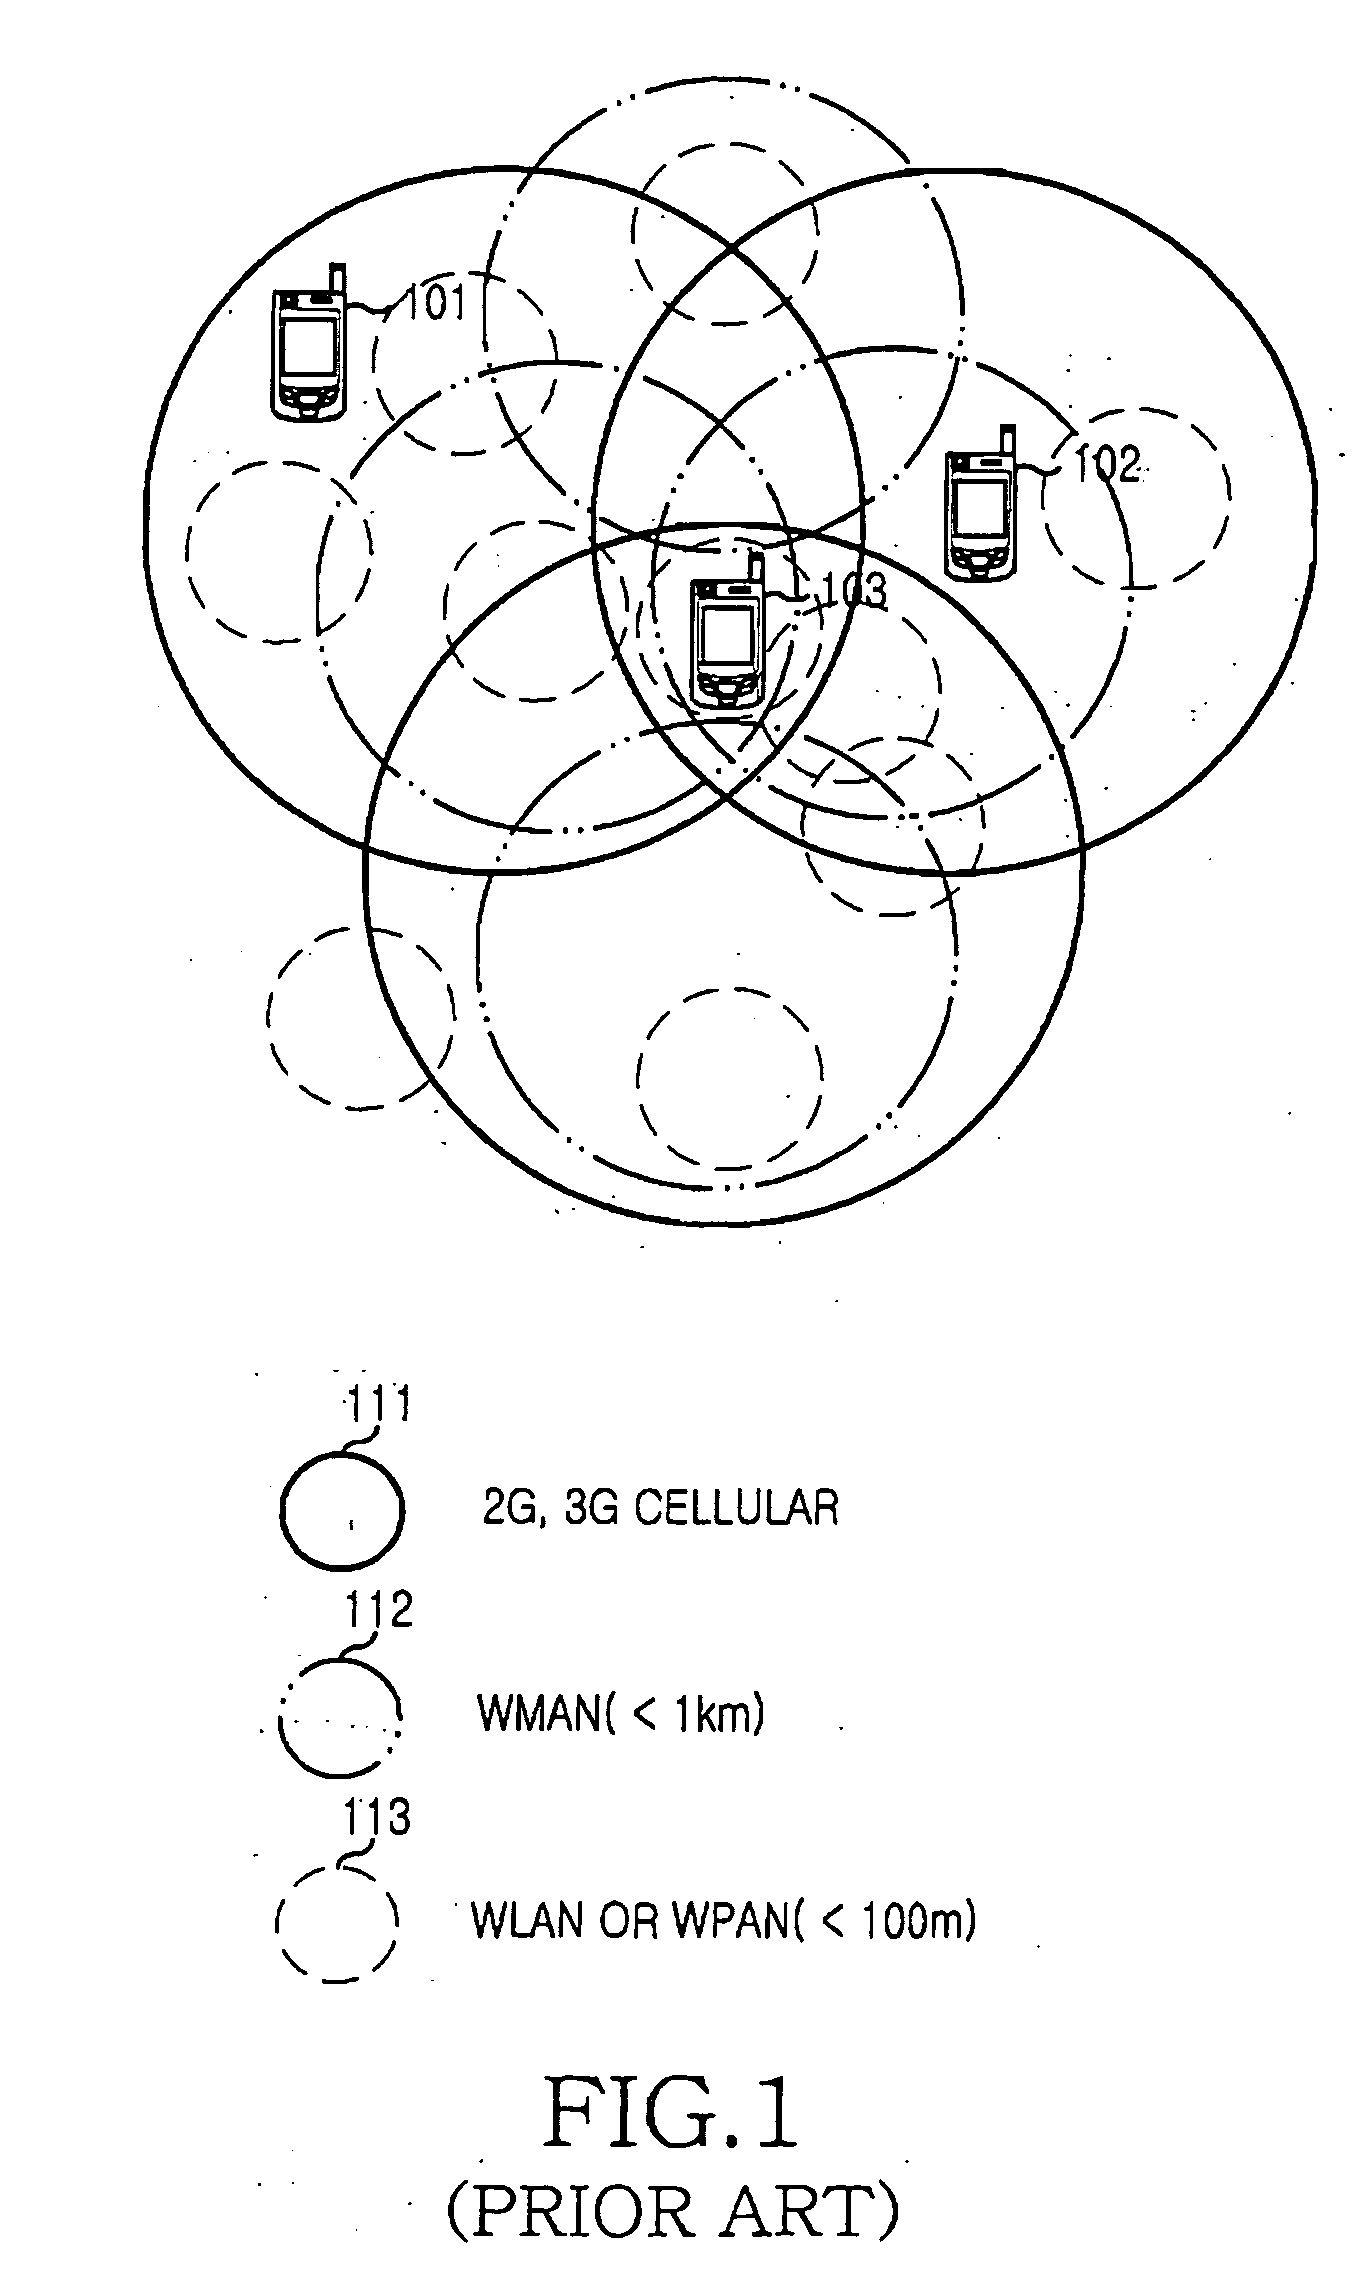 Data service apparatus and method in heterogeneous wireless networks